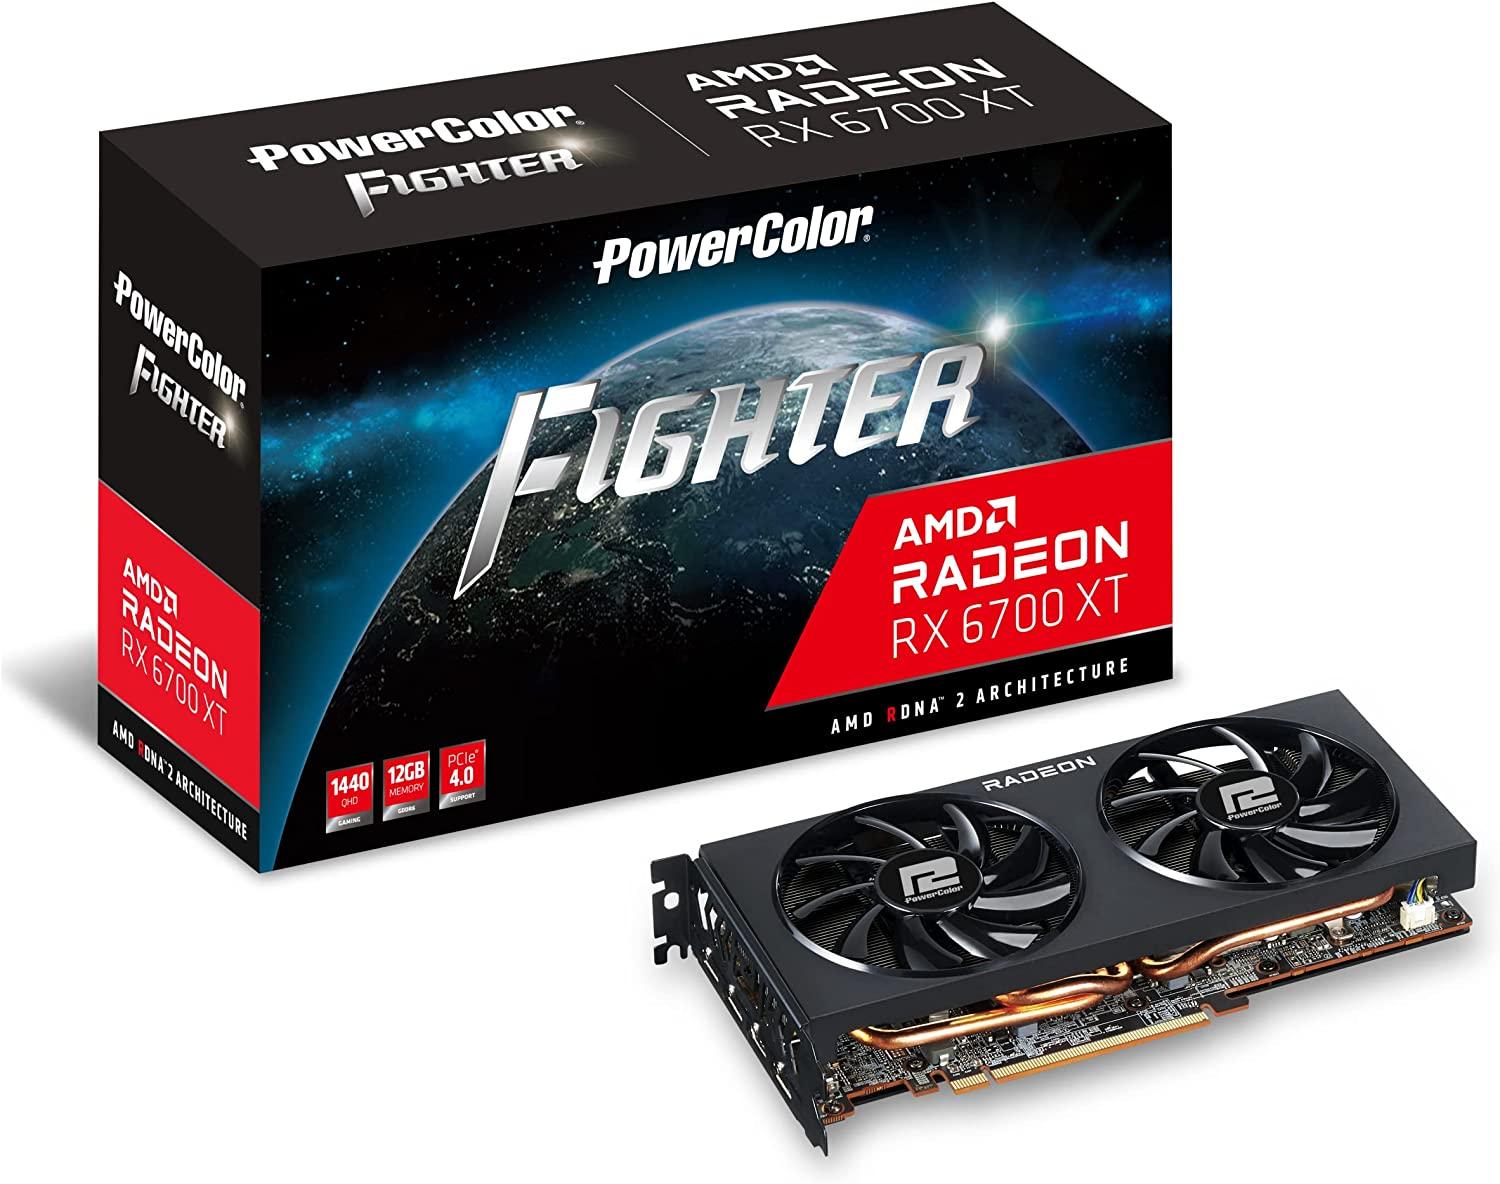 PowerColor Fighter AMD Radeon RX 6700 XT 12GB GDDR6 Video Card for $369.10 Shipped